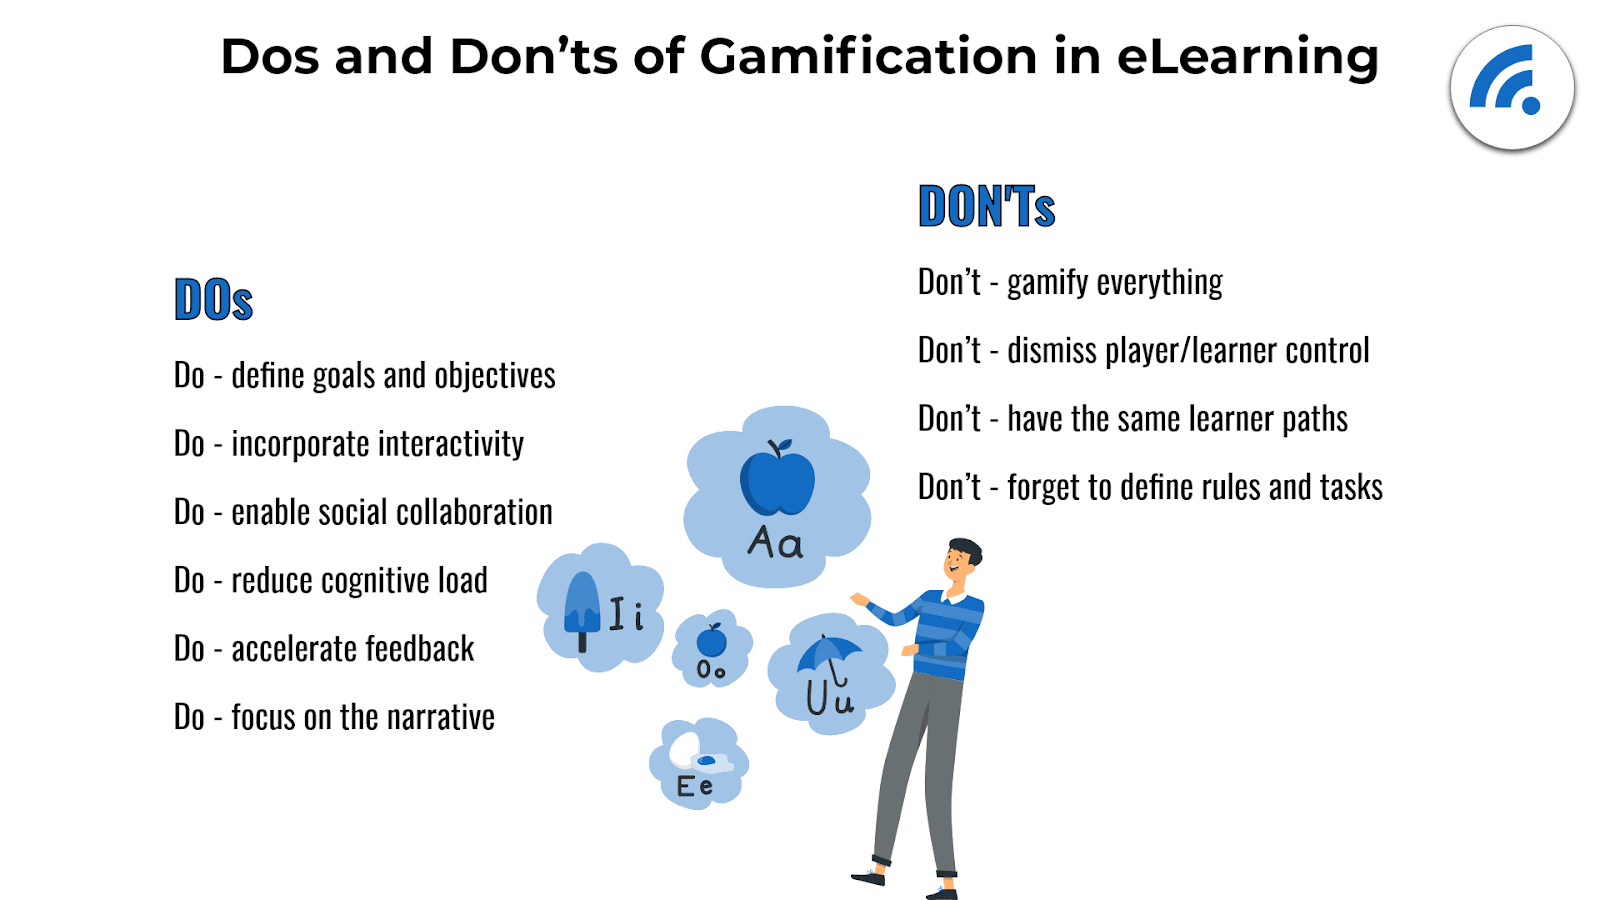 Dos and Don'ts of Gamification in eLearning